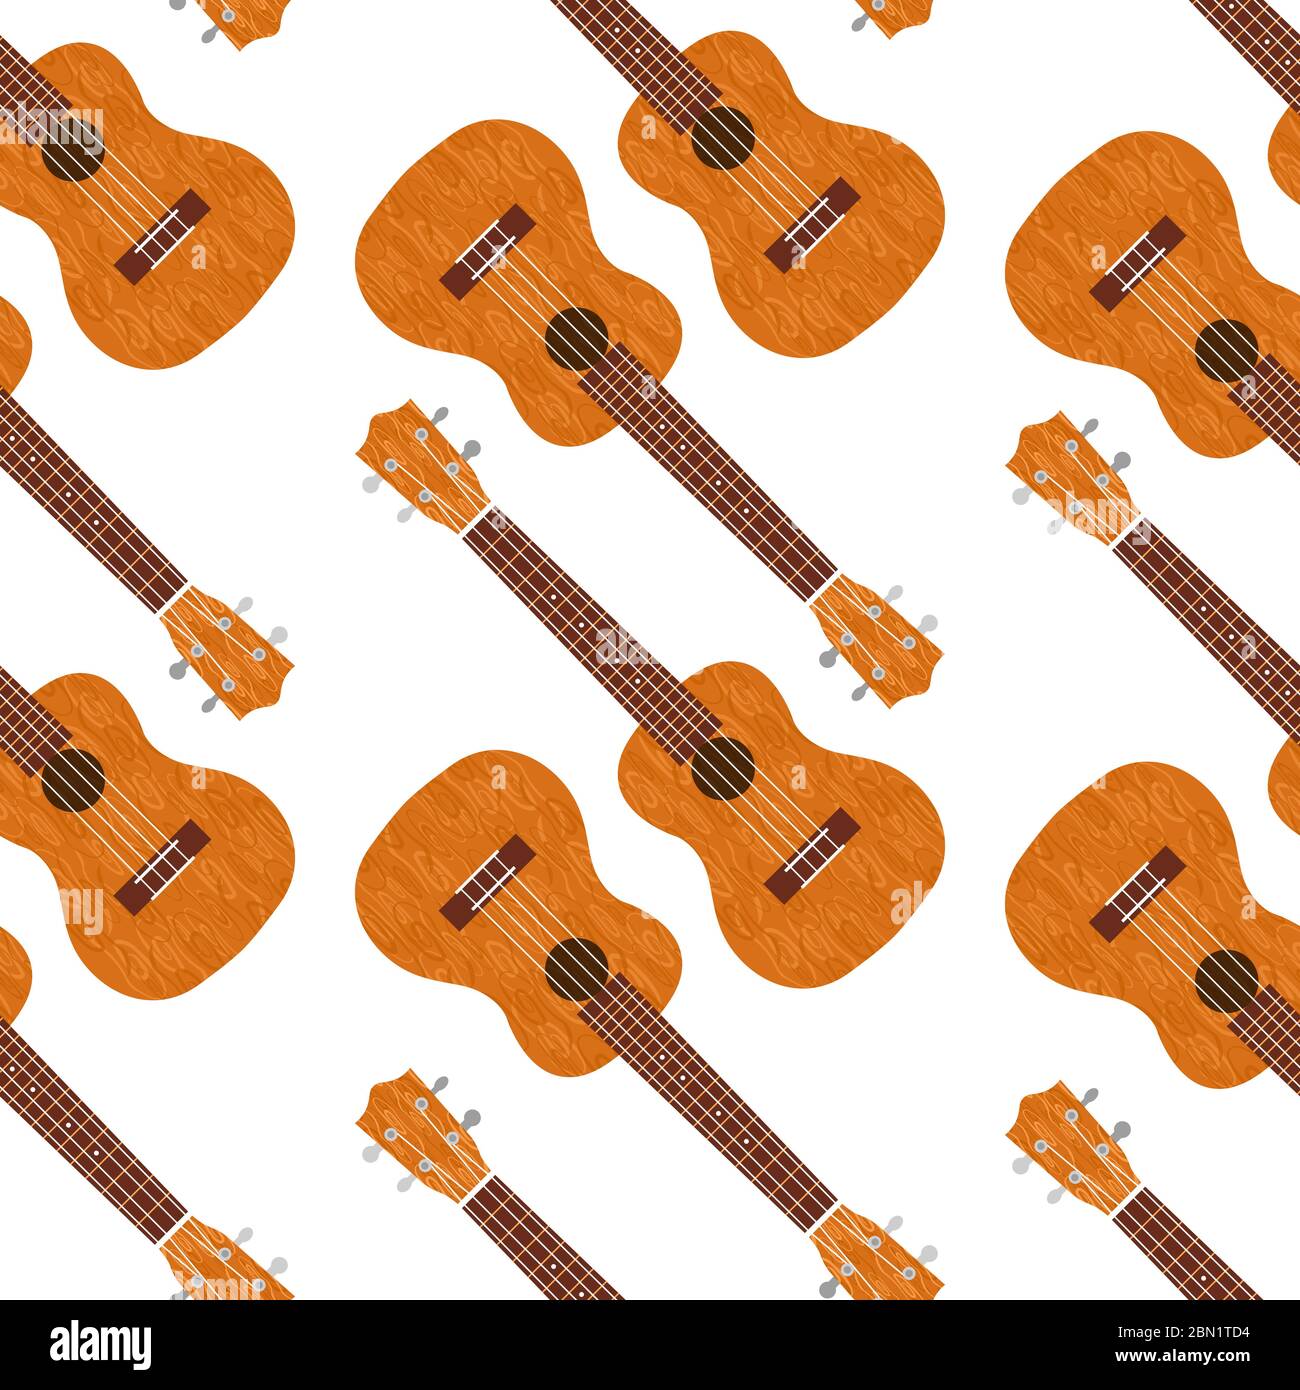 Ukulele Hawaiian guitar. From brown wood. Realistic vector illustration. Seamless pattern. Transparent background Stock Vector